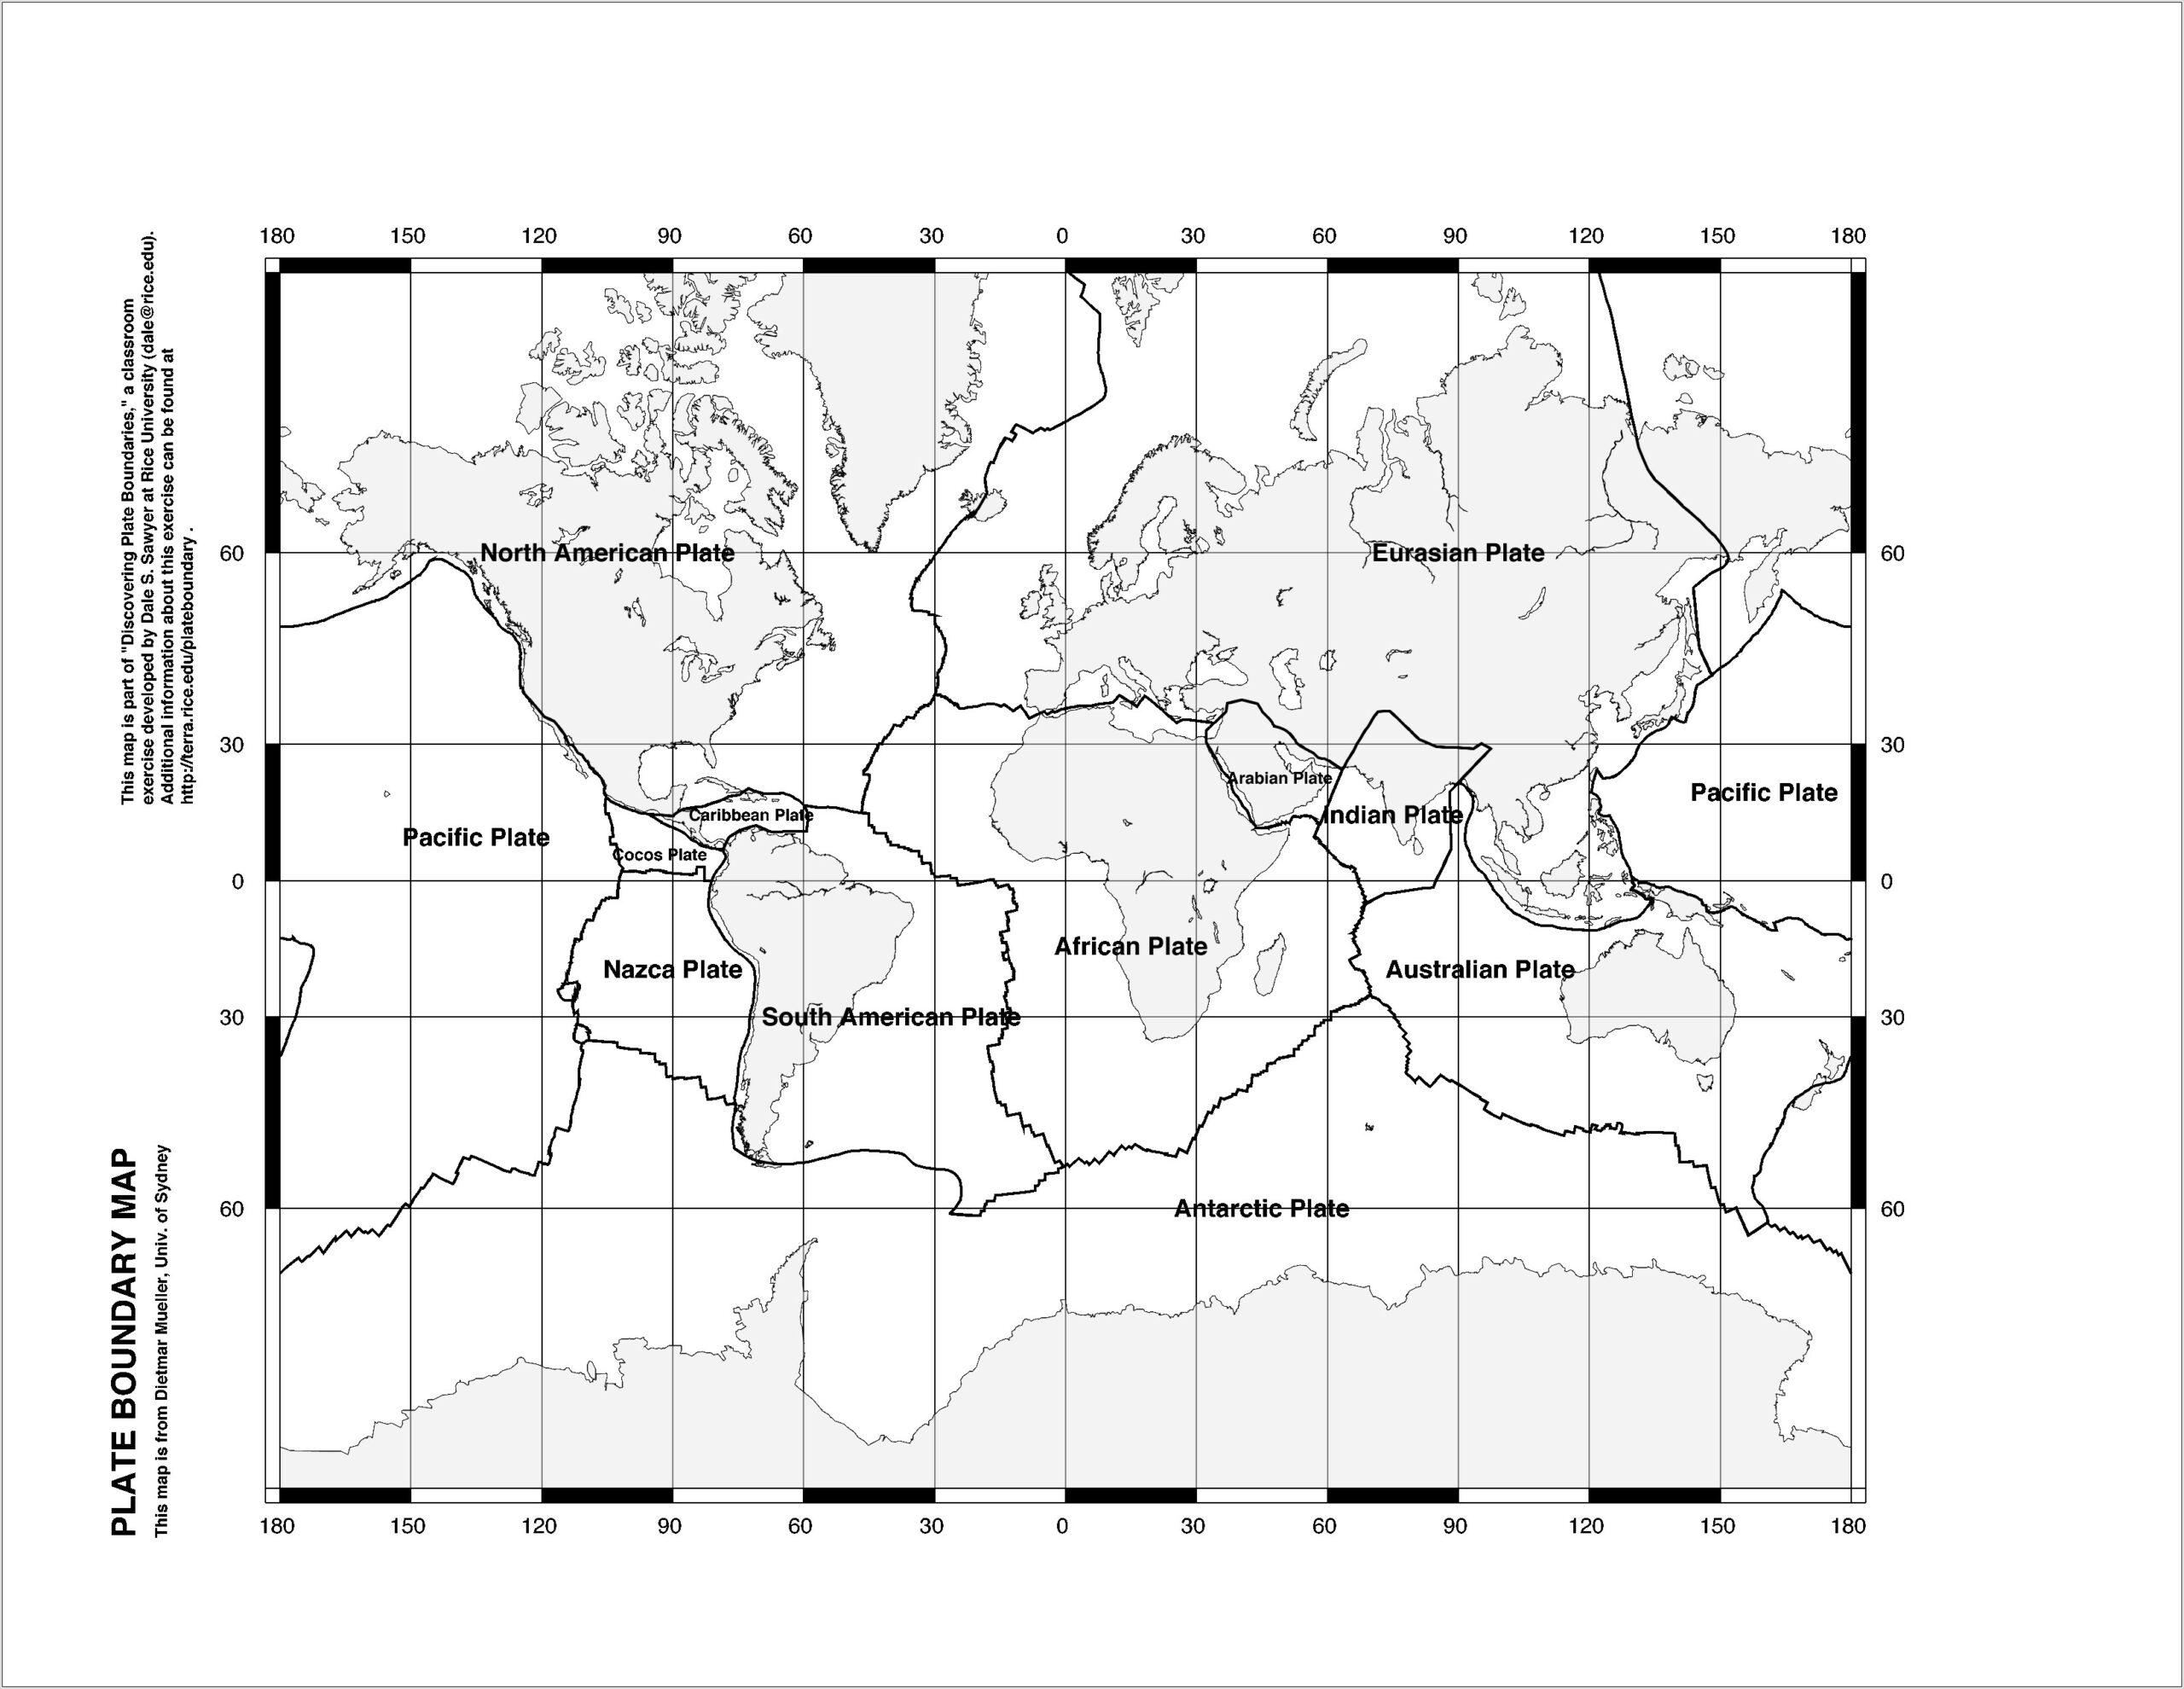 Worksheet On Plate Tectonics For Free